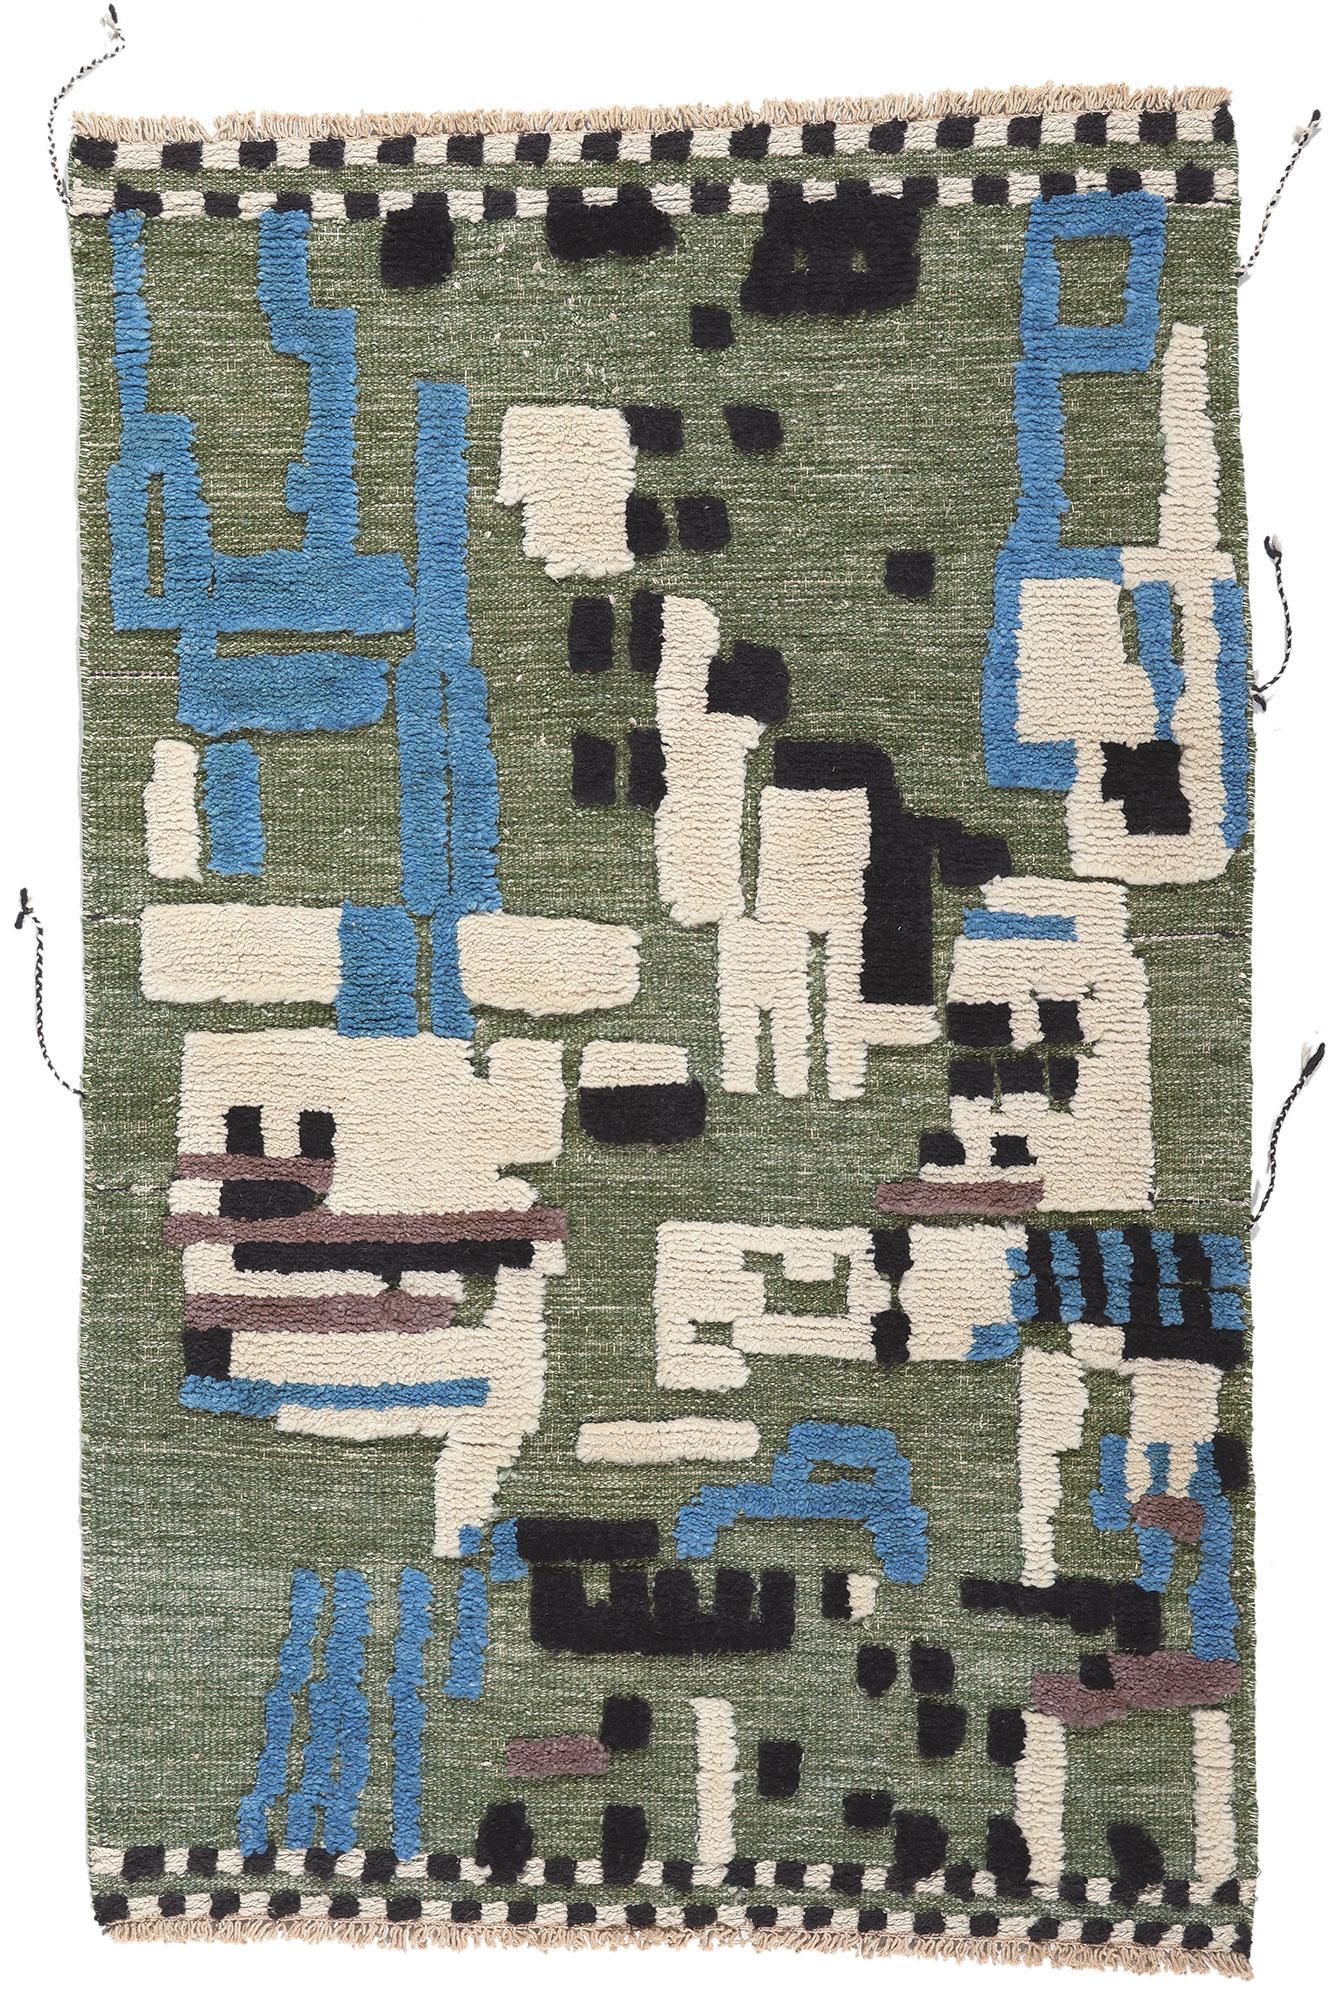 Organique The Moderns Modern Biophilic Style Moroccan High-Low Rug Inspired by Nature (en anglais) en vente